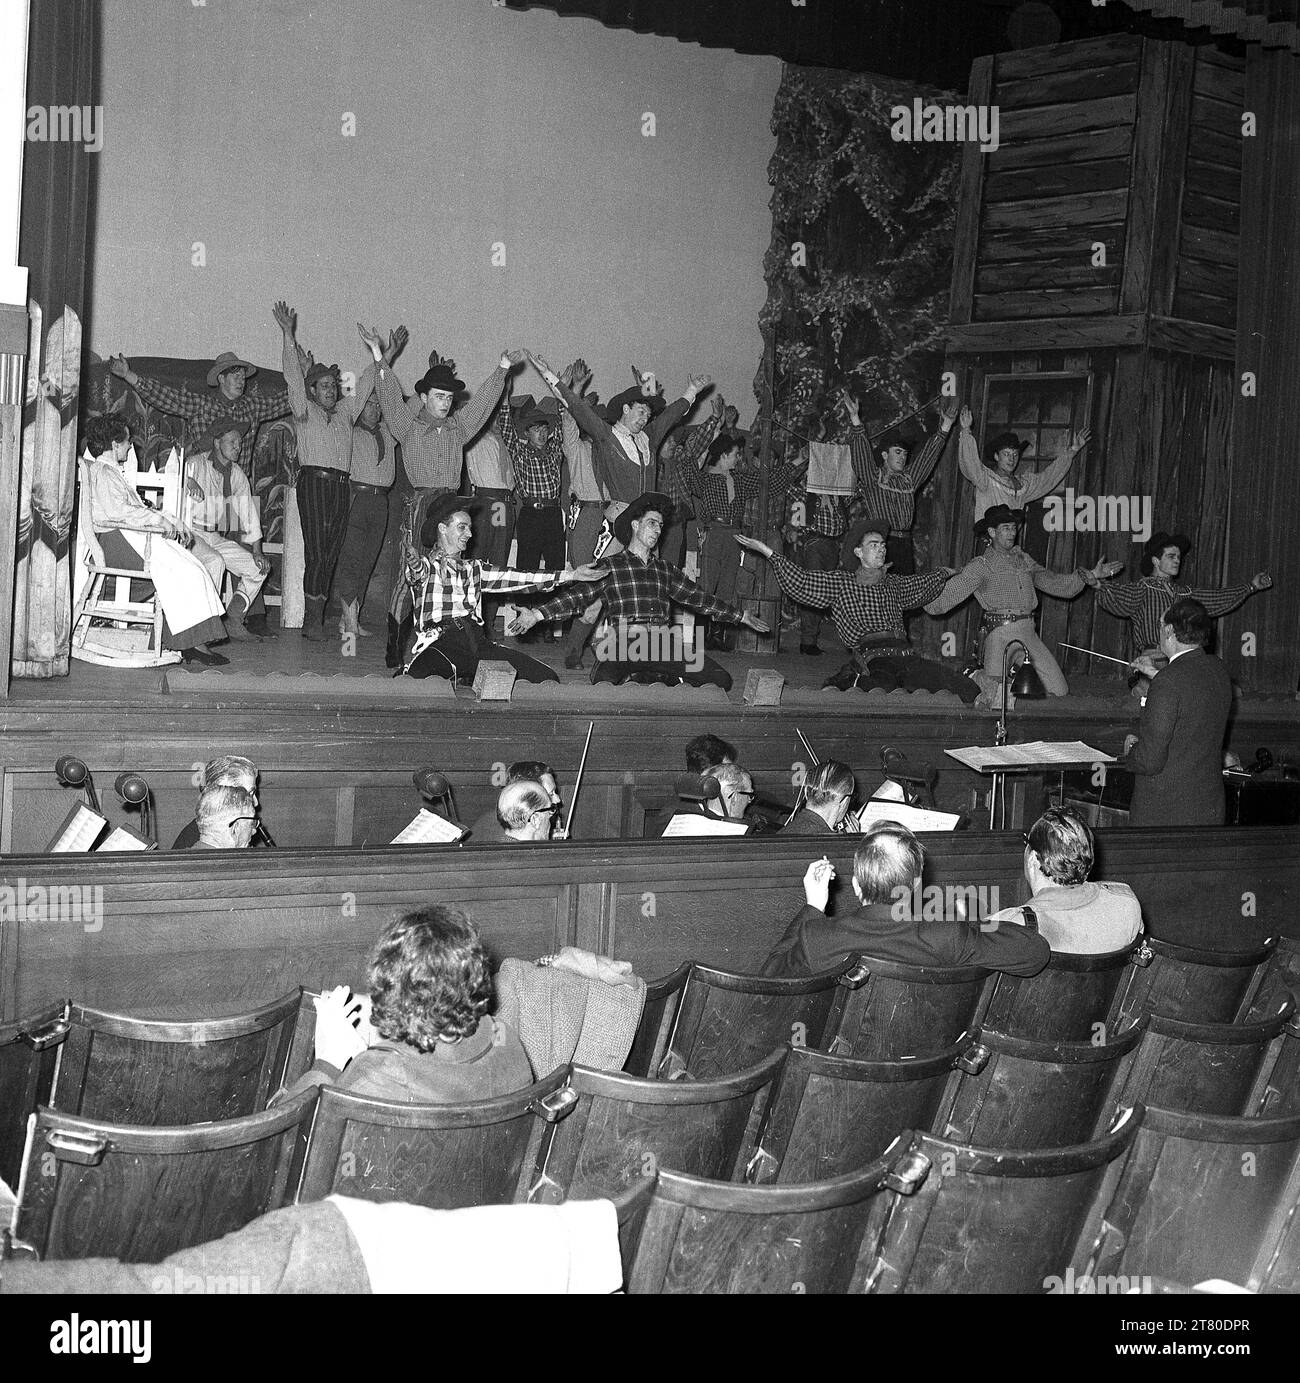 1960s, historical, performers on stage in the musical Oklahoma, with orchestra and conductor in the pit infront of the stage, Kelty, Scotland, UK. Traditional wooden seats for the audience. Written by Rodgers & Hammerstein, the musical tells the story of an early 20th century american farm girl and her rival suitors. Stock Photo